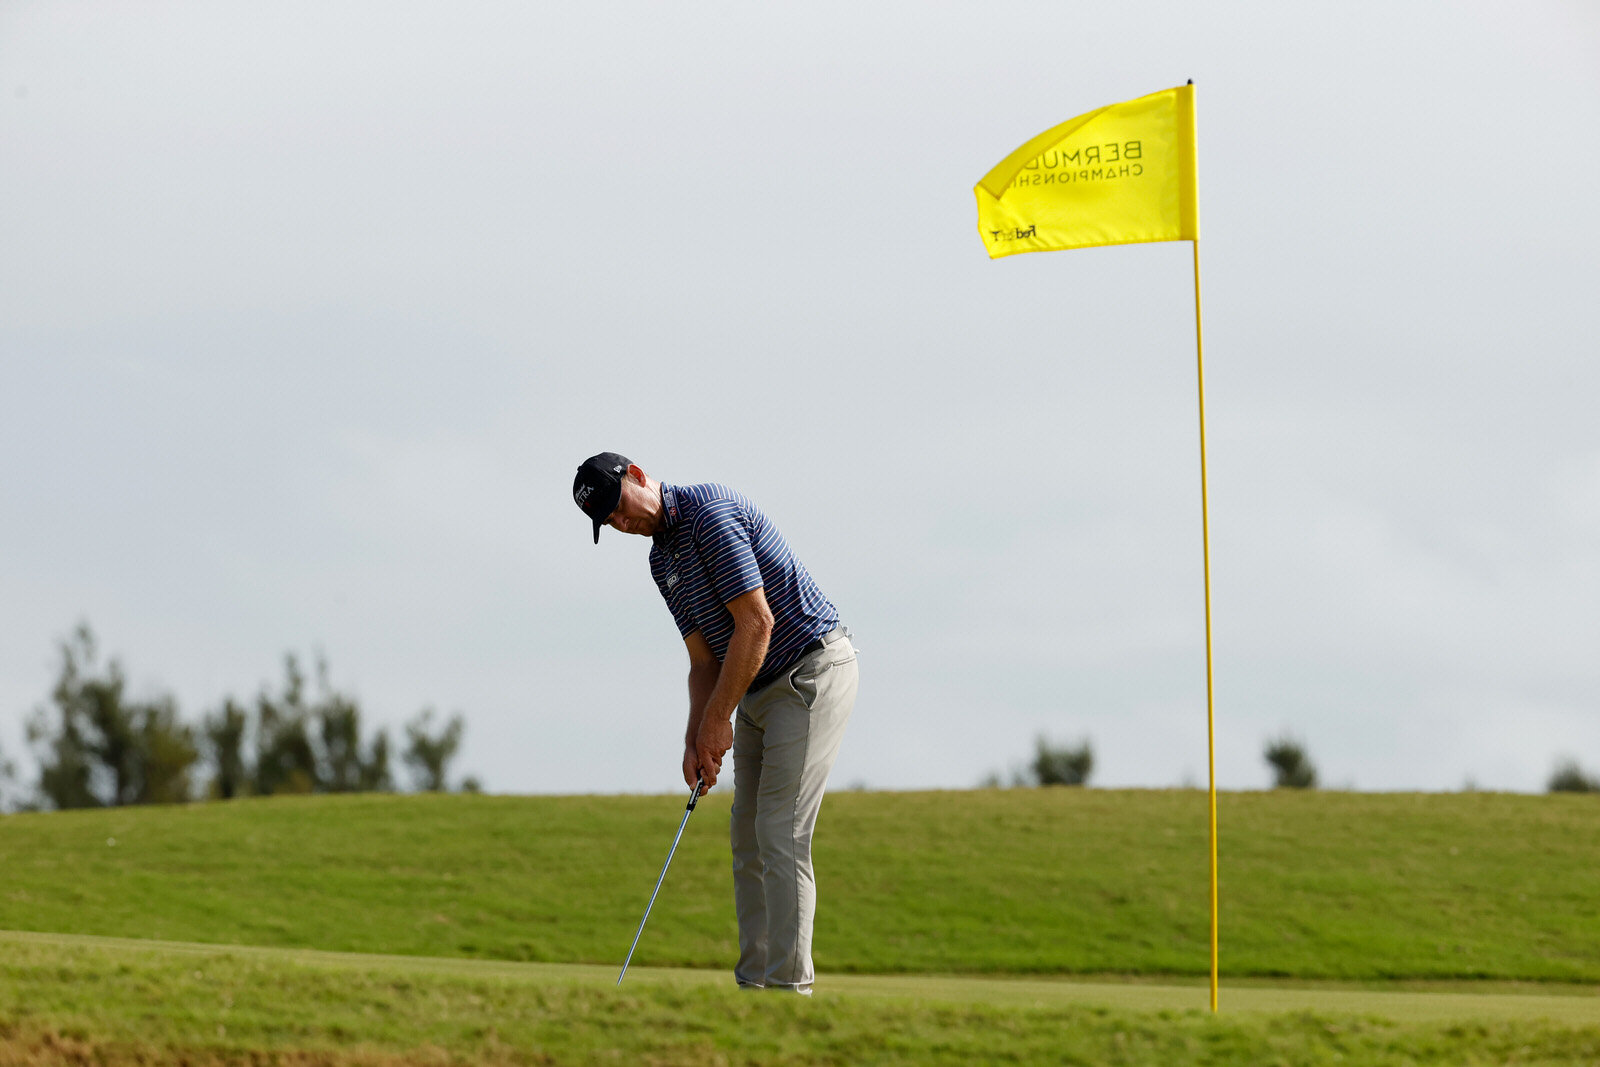  SOUTHAMPTON, BERMUDA - OCTOBER 29: Vaughn Taylor of the United States putts on the ninth green during the first round of the Bermuda Championship at Port Royal Golf Course on October 29, 2020 in Southampton, Bermuda. (Photo by Gregory Shamus/Getty I